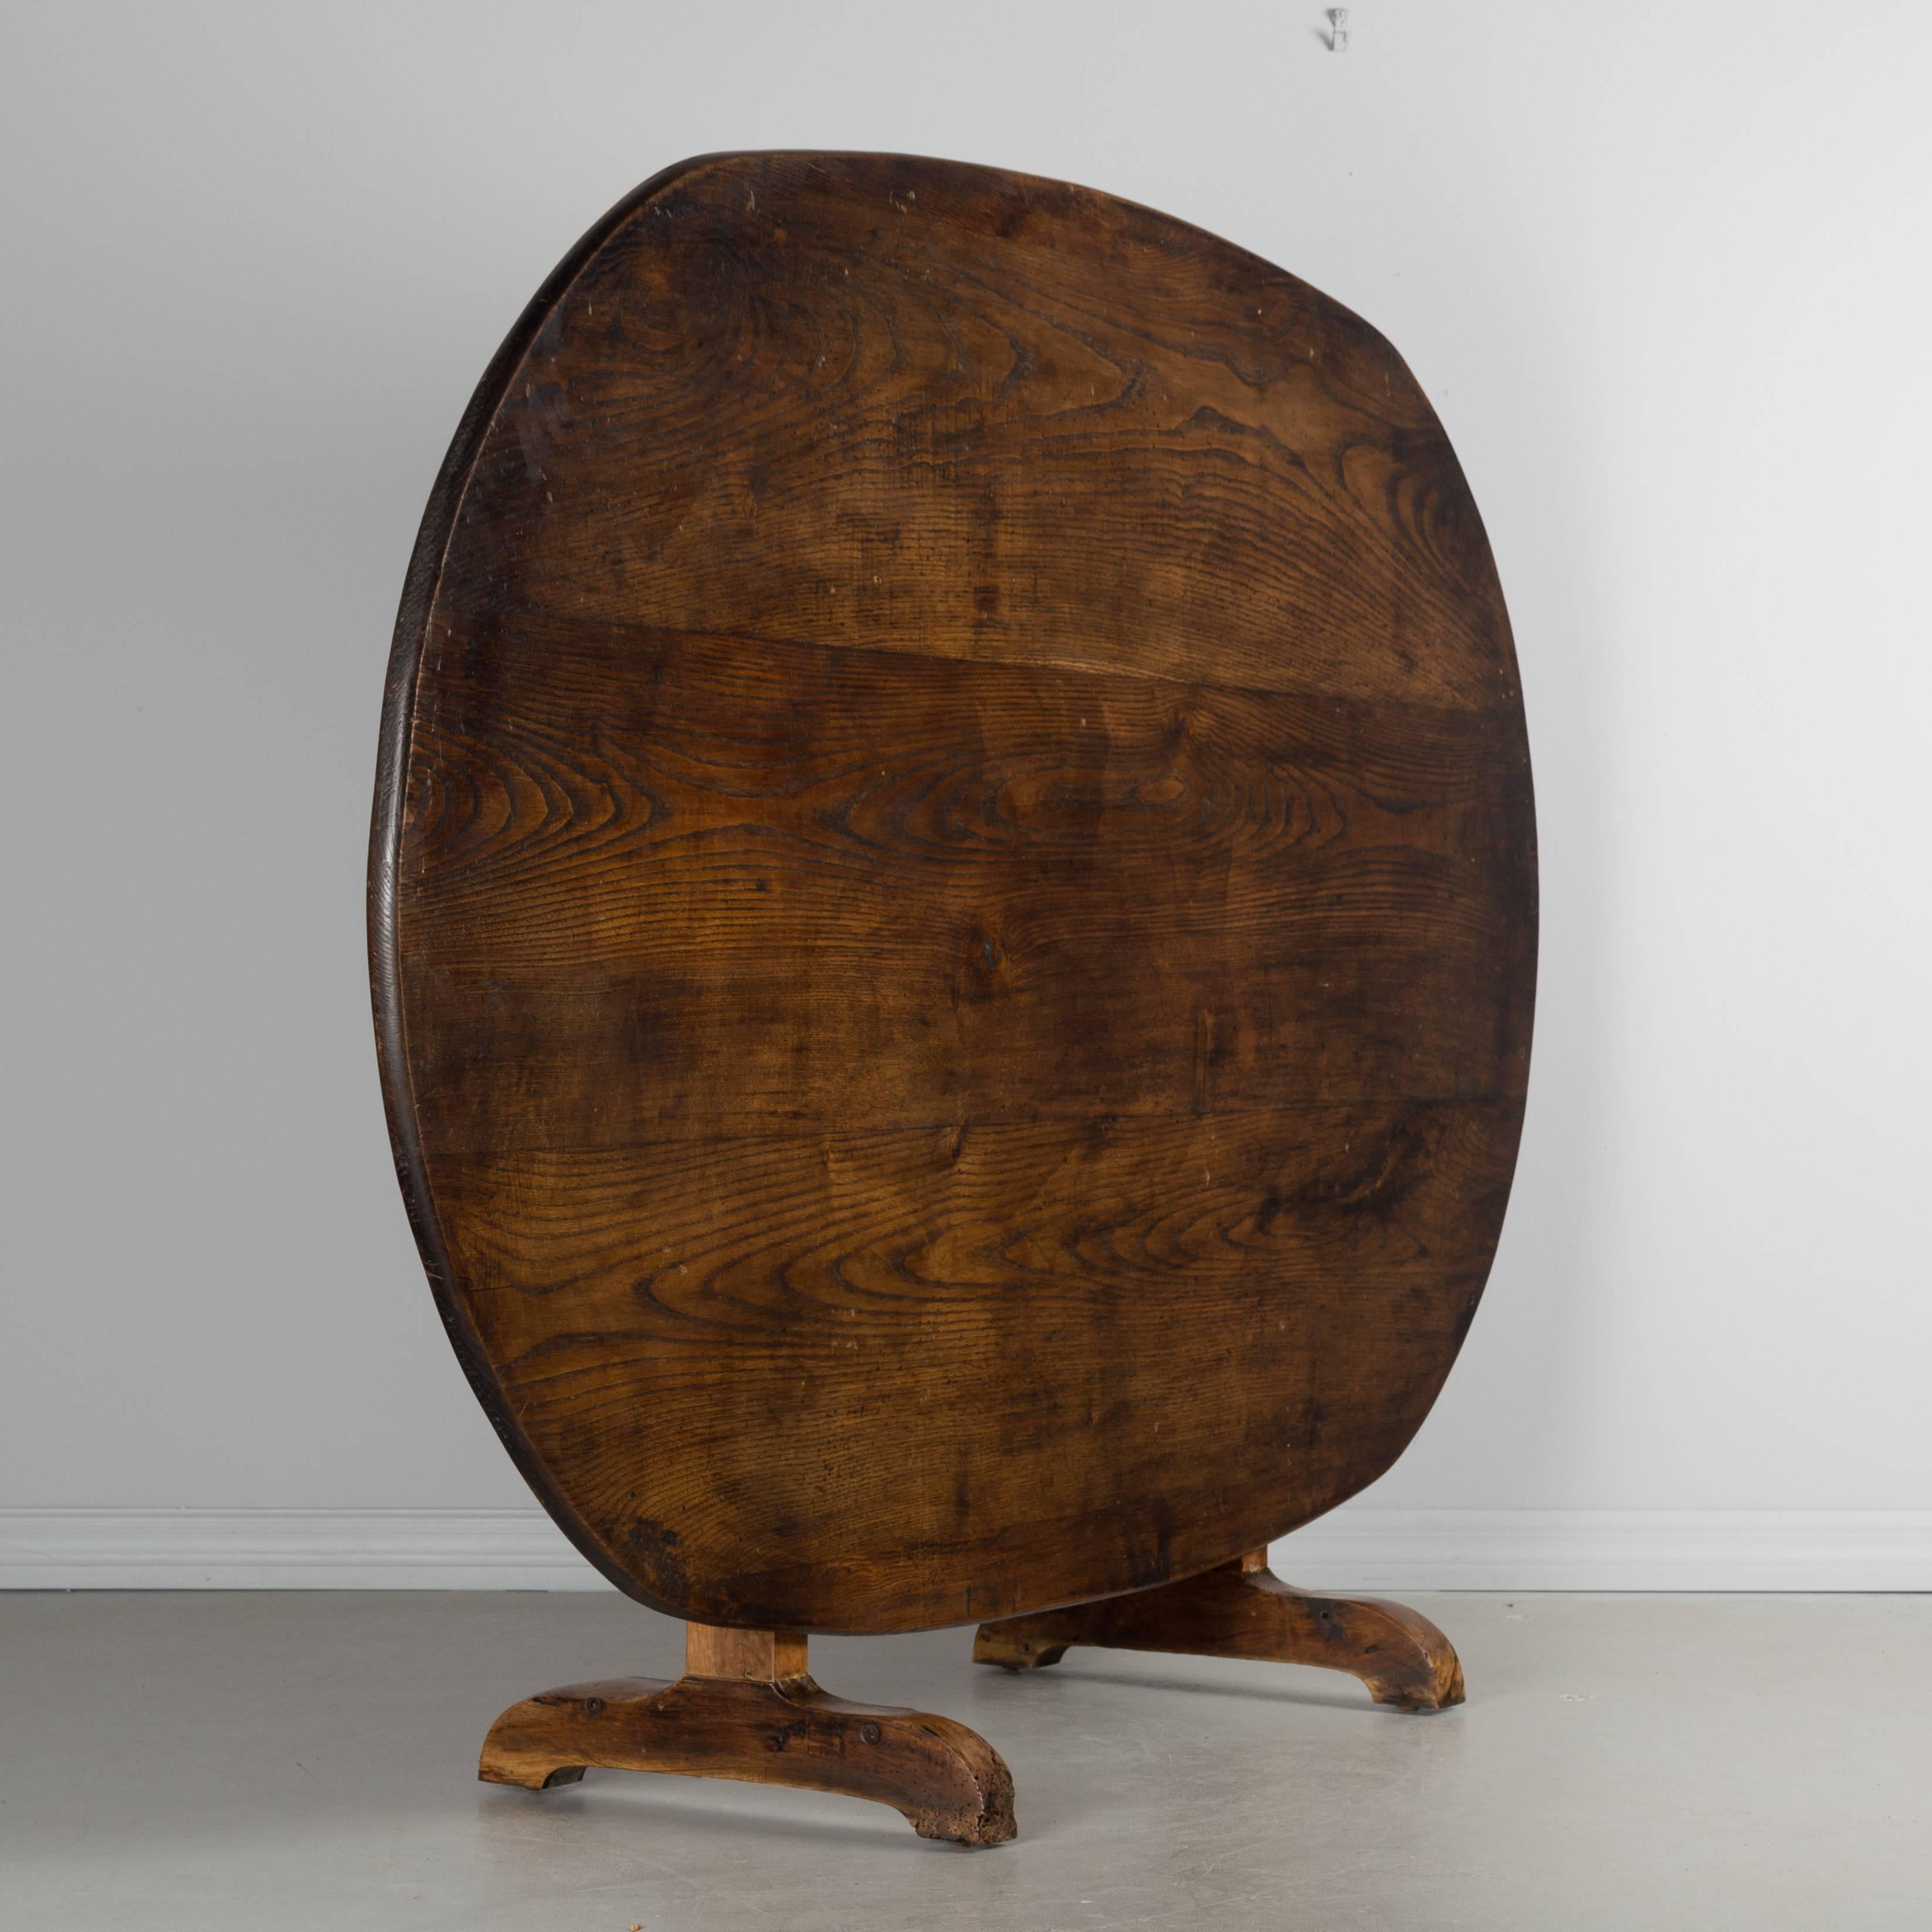 A 19th century French tilt-top table with a large oval top made from wide planks of pine and a study solid walnut base. Waxed finish. Measure: The height when tilted is 52 inches.